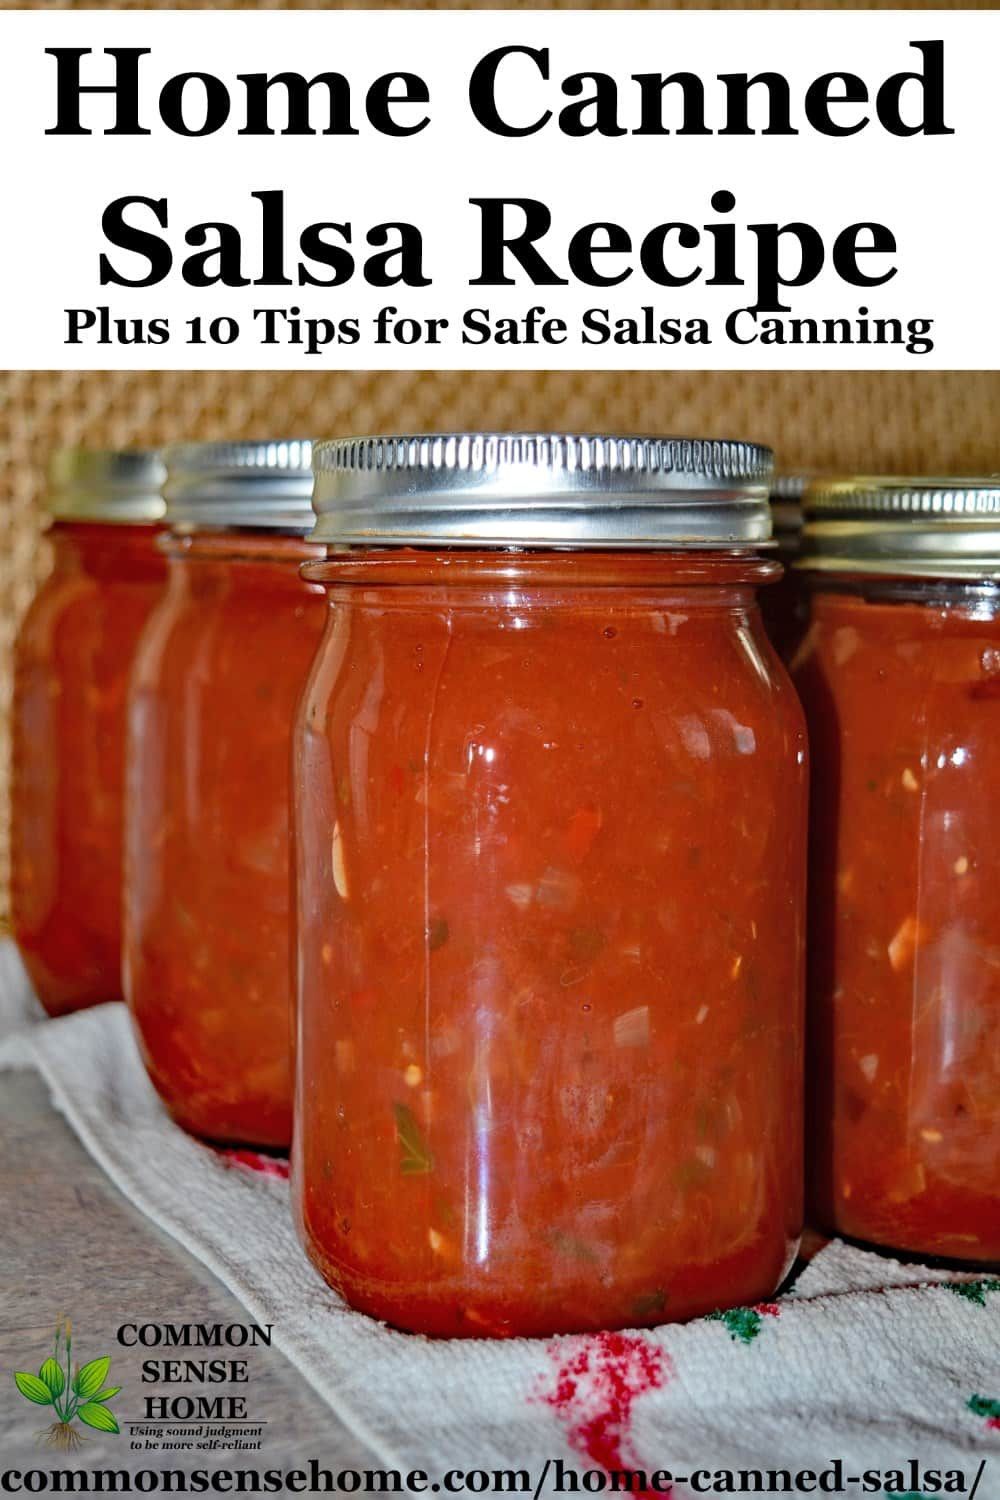 Home Canned Salsa Recipe
 Home Canned Salsa Recipe Plus 10 Tips for Canning Salsa